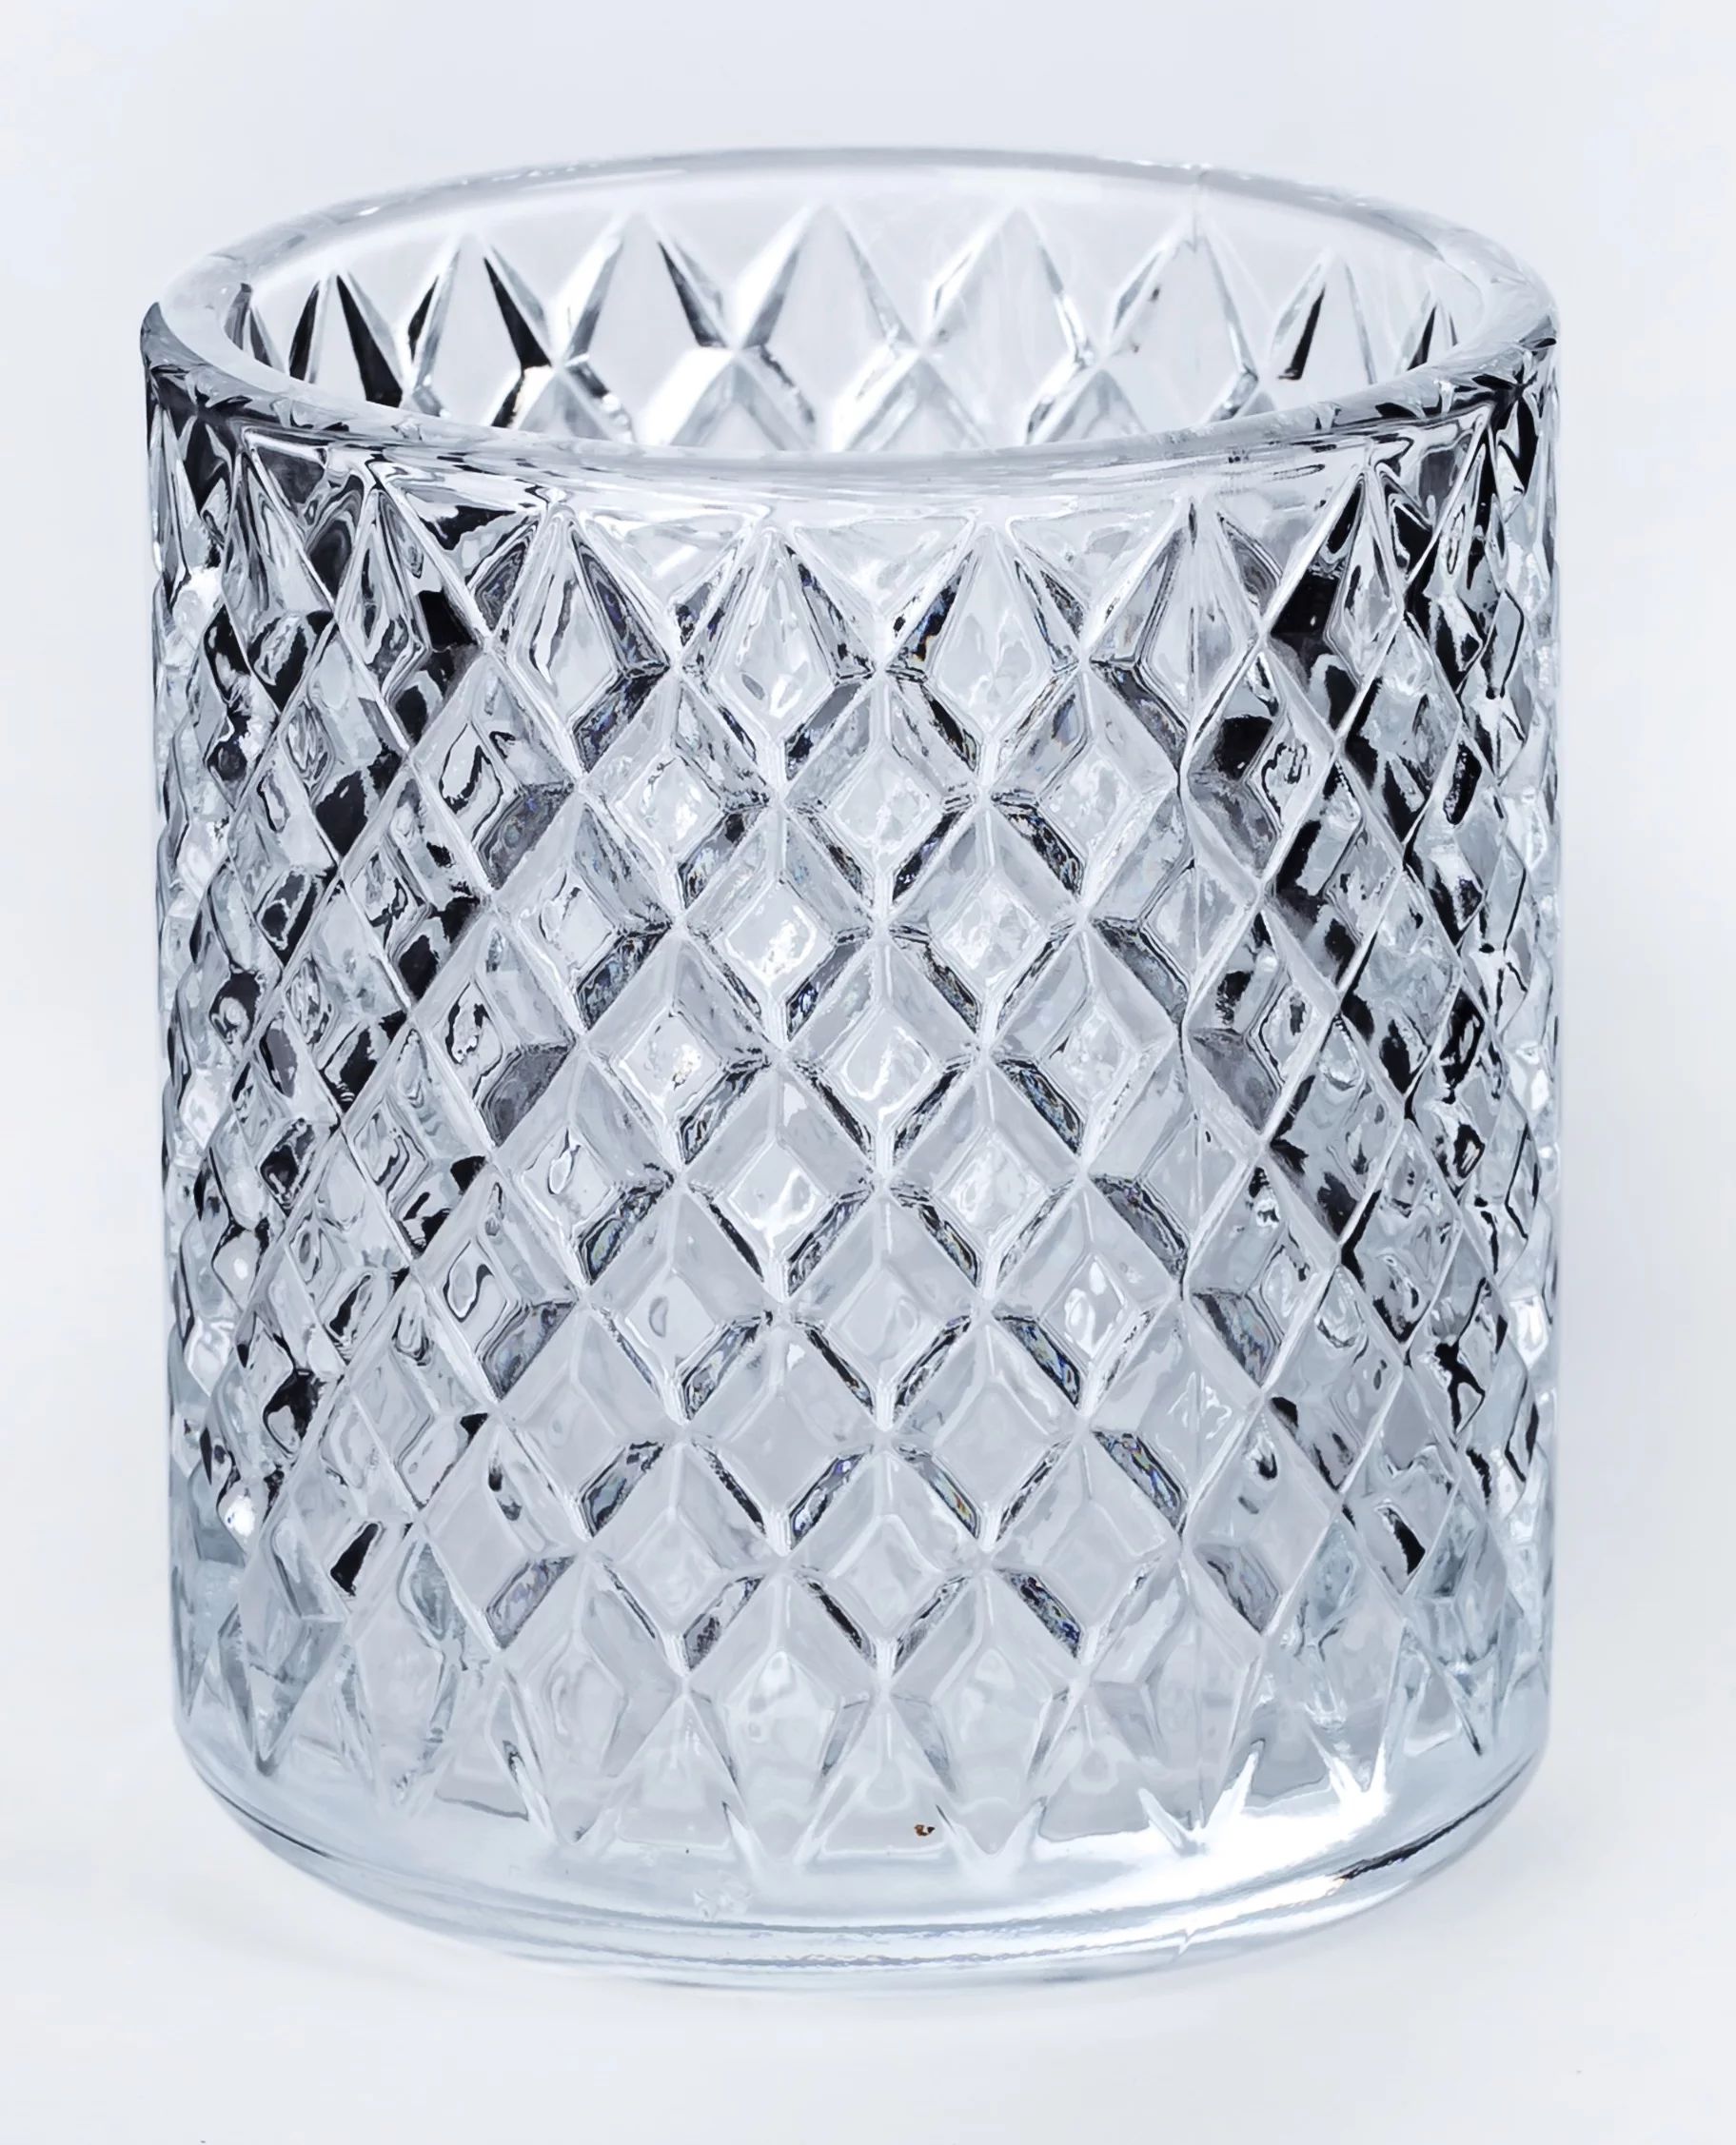 Mainstays High Clear Diamond Pattern Glass Votive and Tealight Candle holder | Walmart (US)